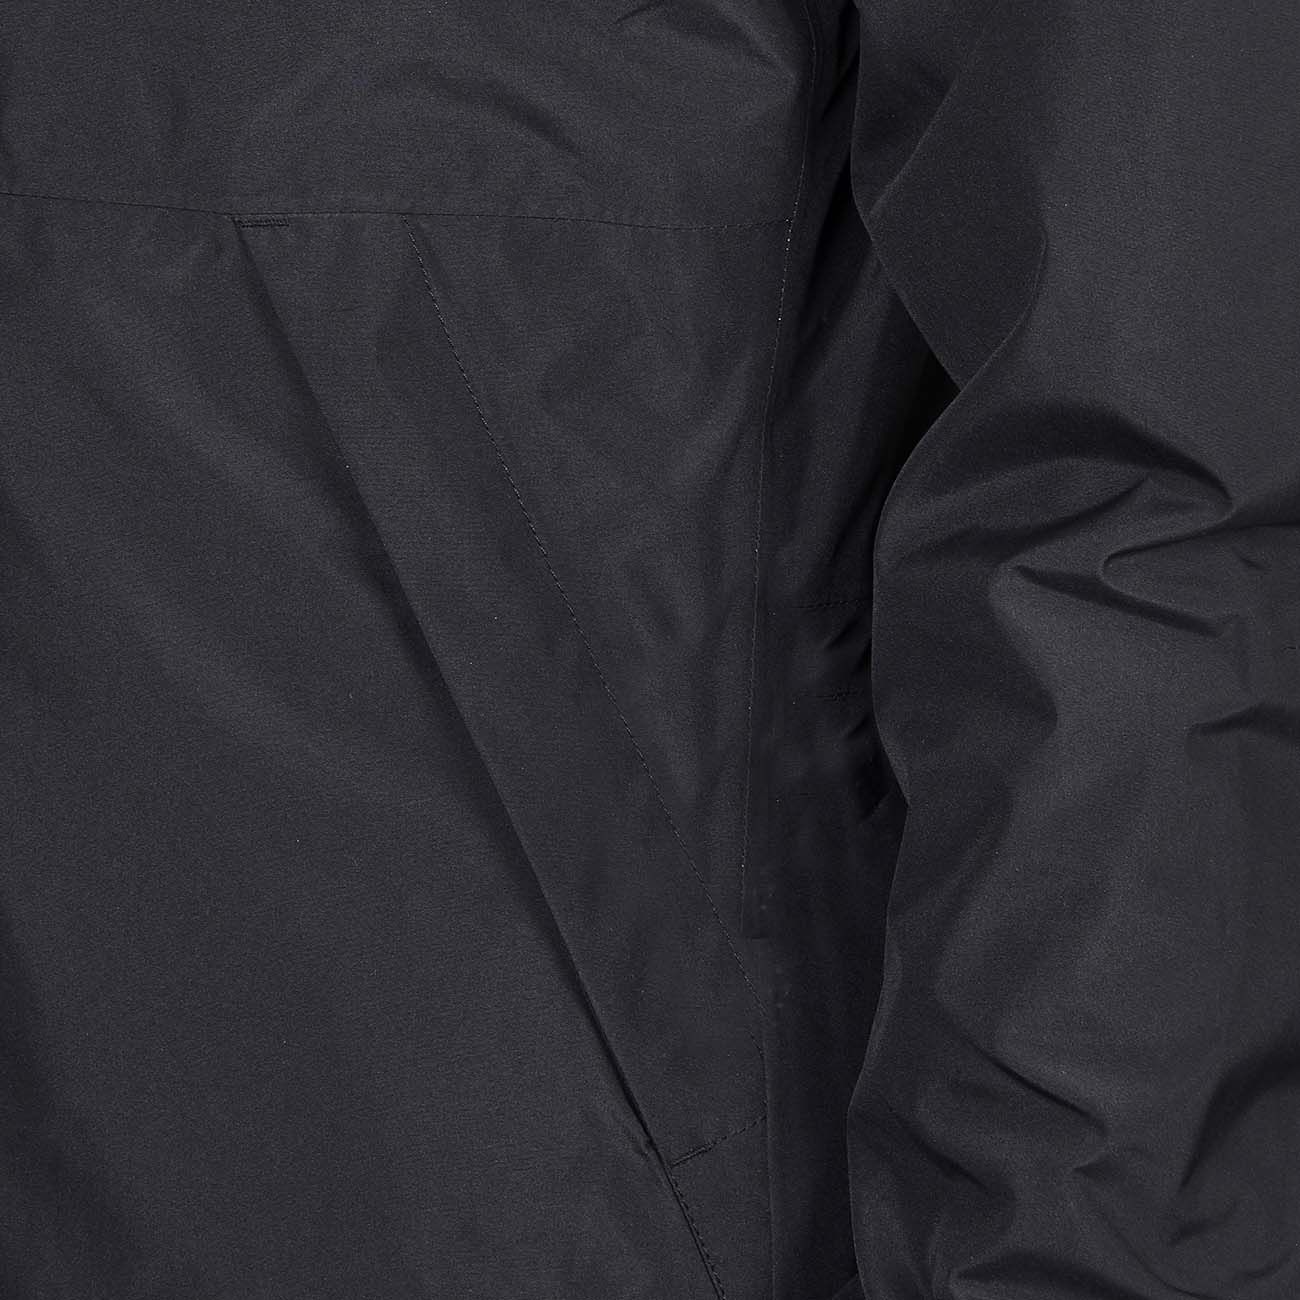 browser Practiced Infect THE NORTH FACE NASLUND TRICLIMATE JACKET Man Black | Mascheroni Sportswear